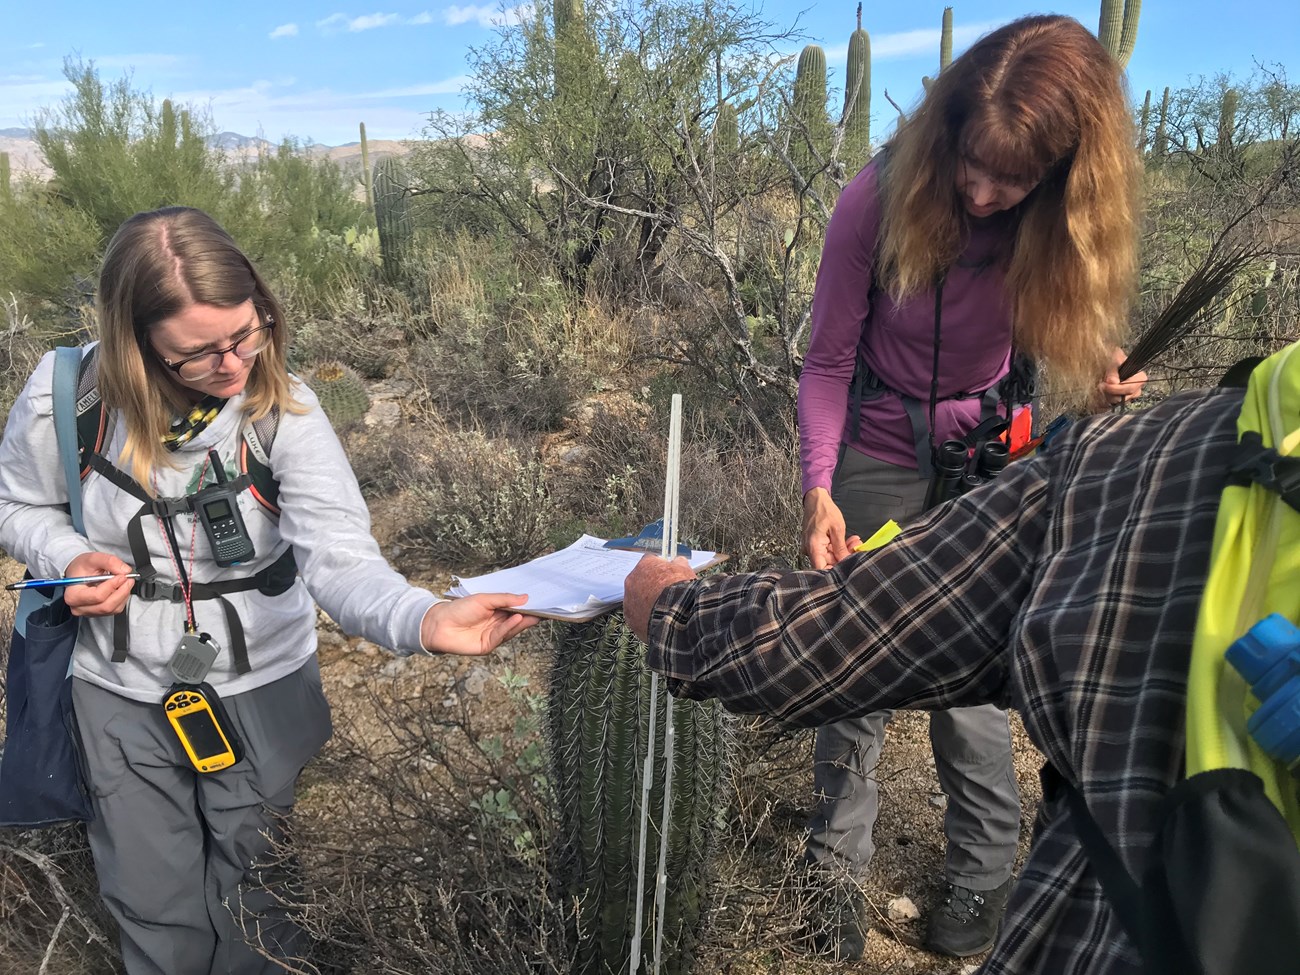 Three people working together to measure the height of a saguaro using a meter stick